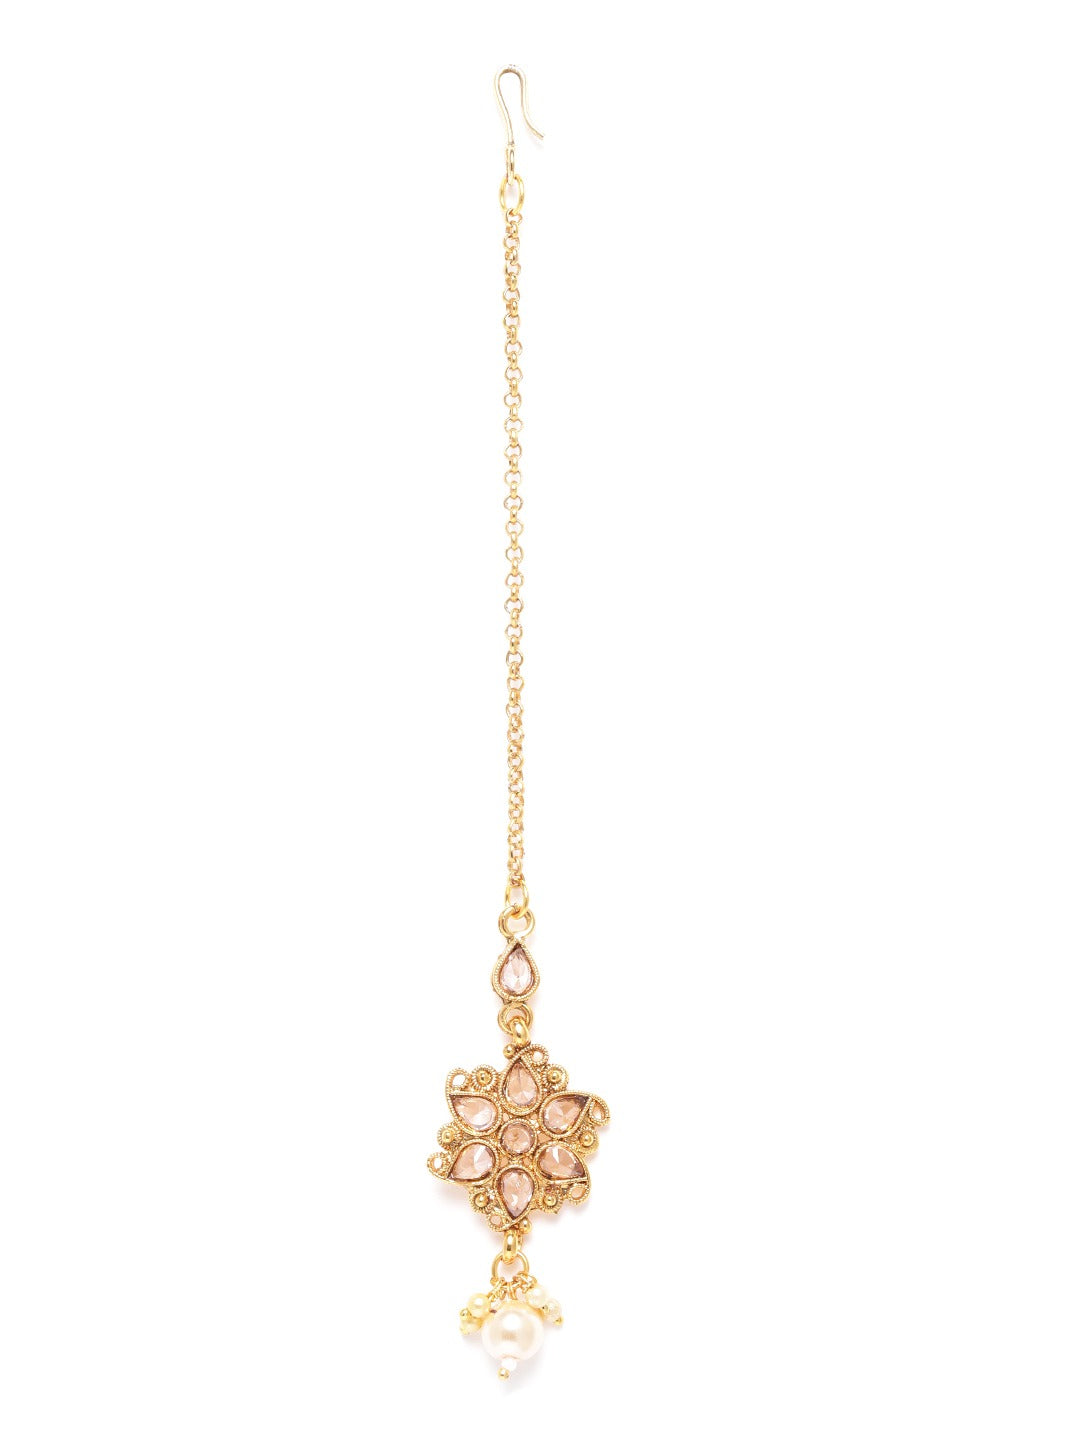 Off-White Gold-Plated Stone-Studded & Beaded Floral Shaped Maang Tika